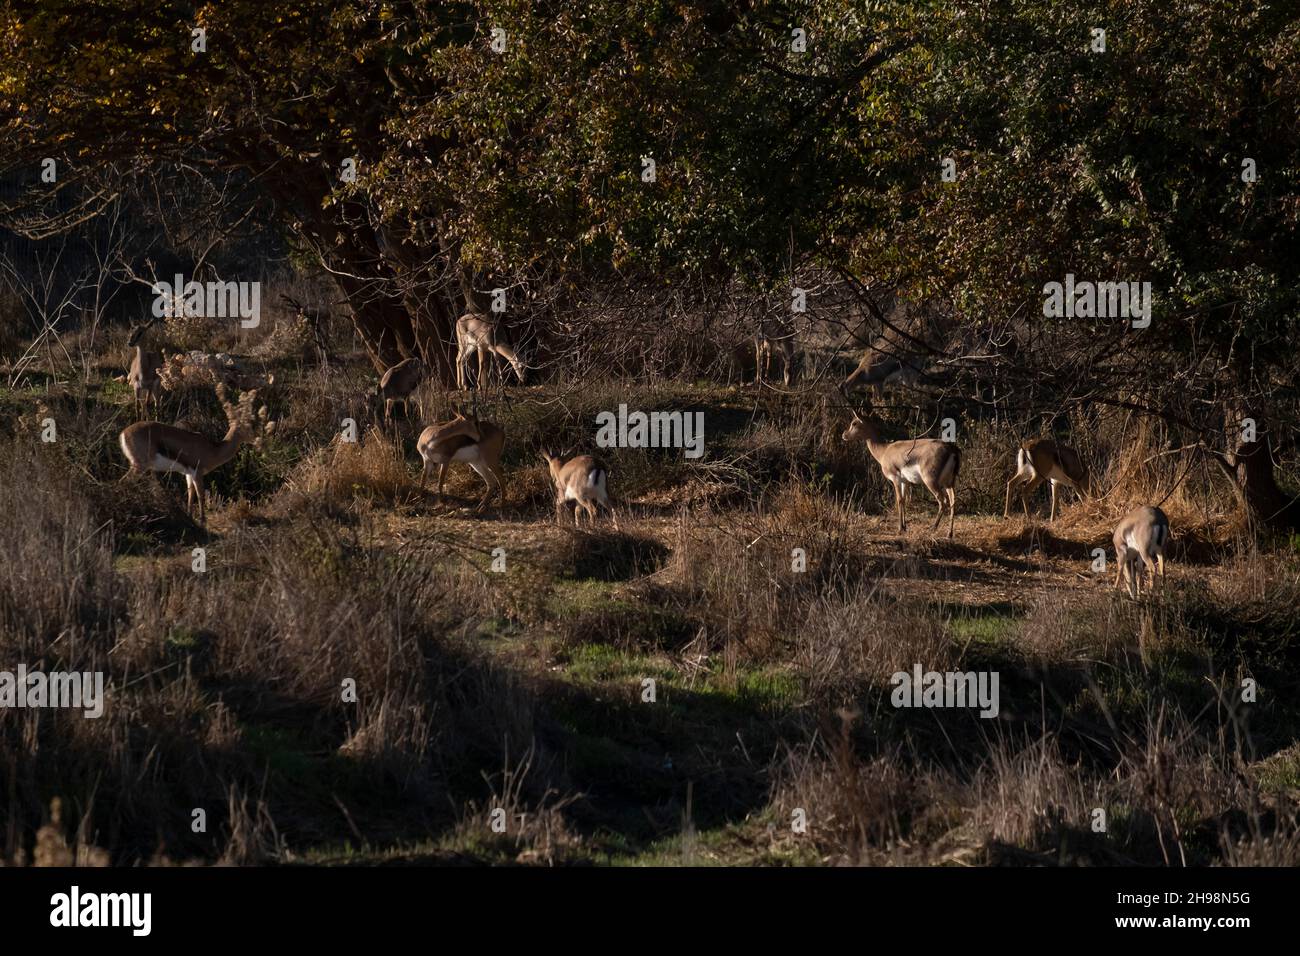 Mountain gazelles herding in Gazelle Valley described as Israel’s first urban nature reserve named for a herd of gazelles of the subspecies Gazella that live in this area located in the heart of Jerusalem, Israel Stock Photo